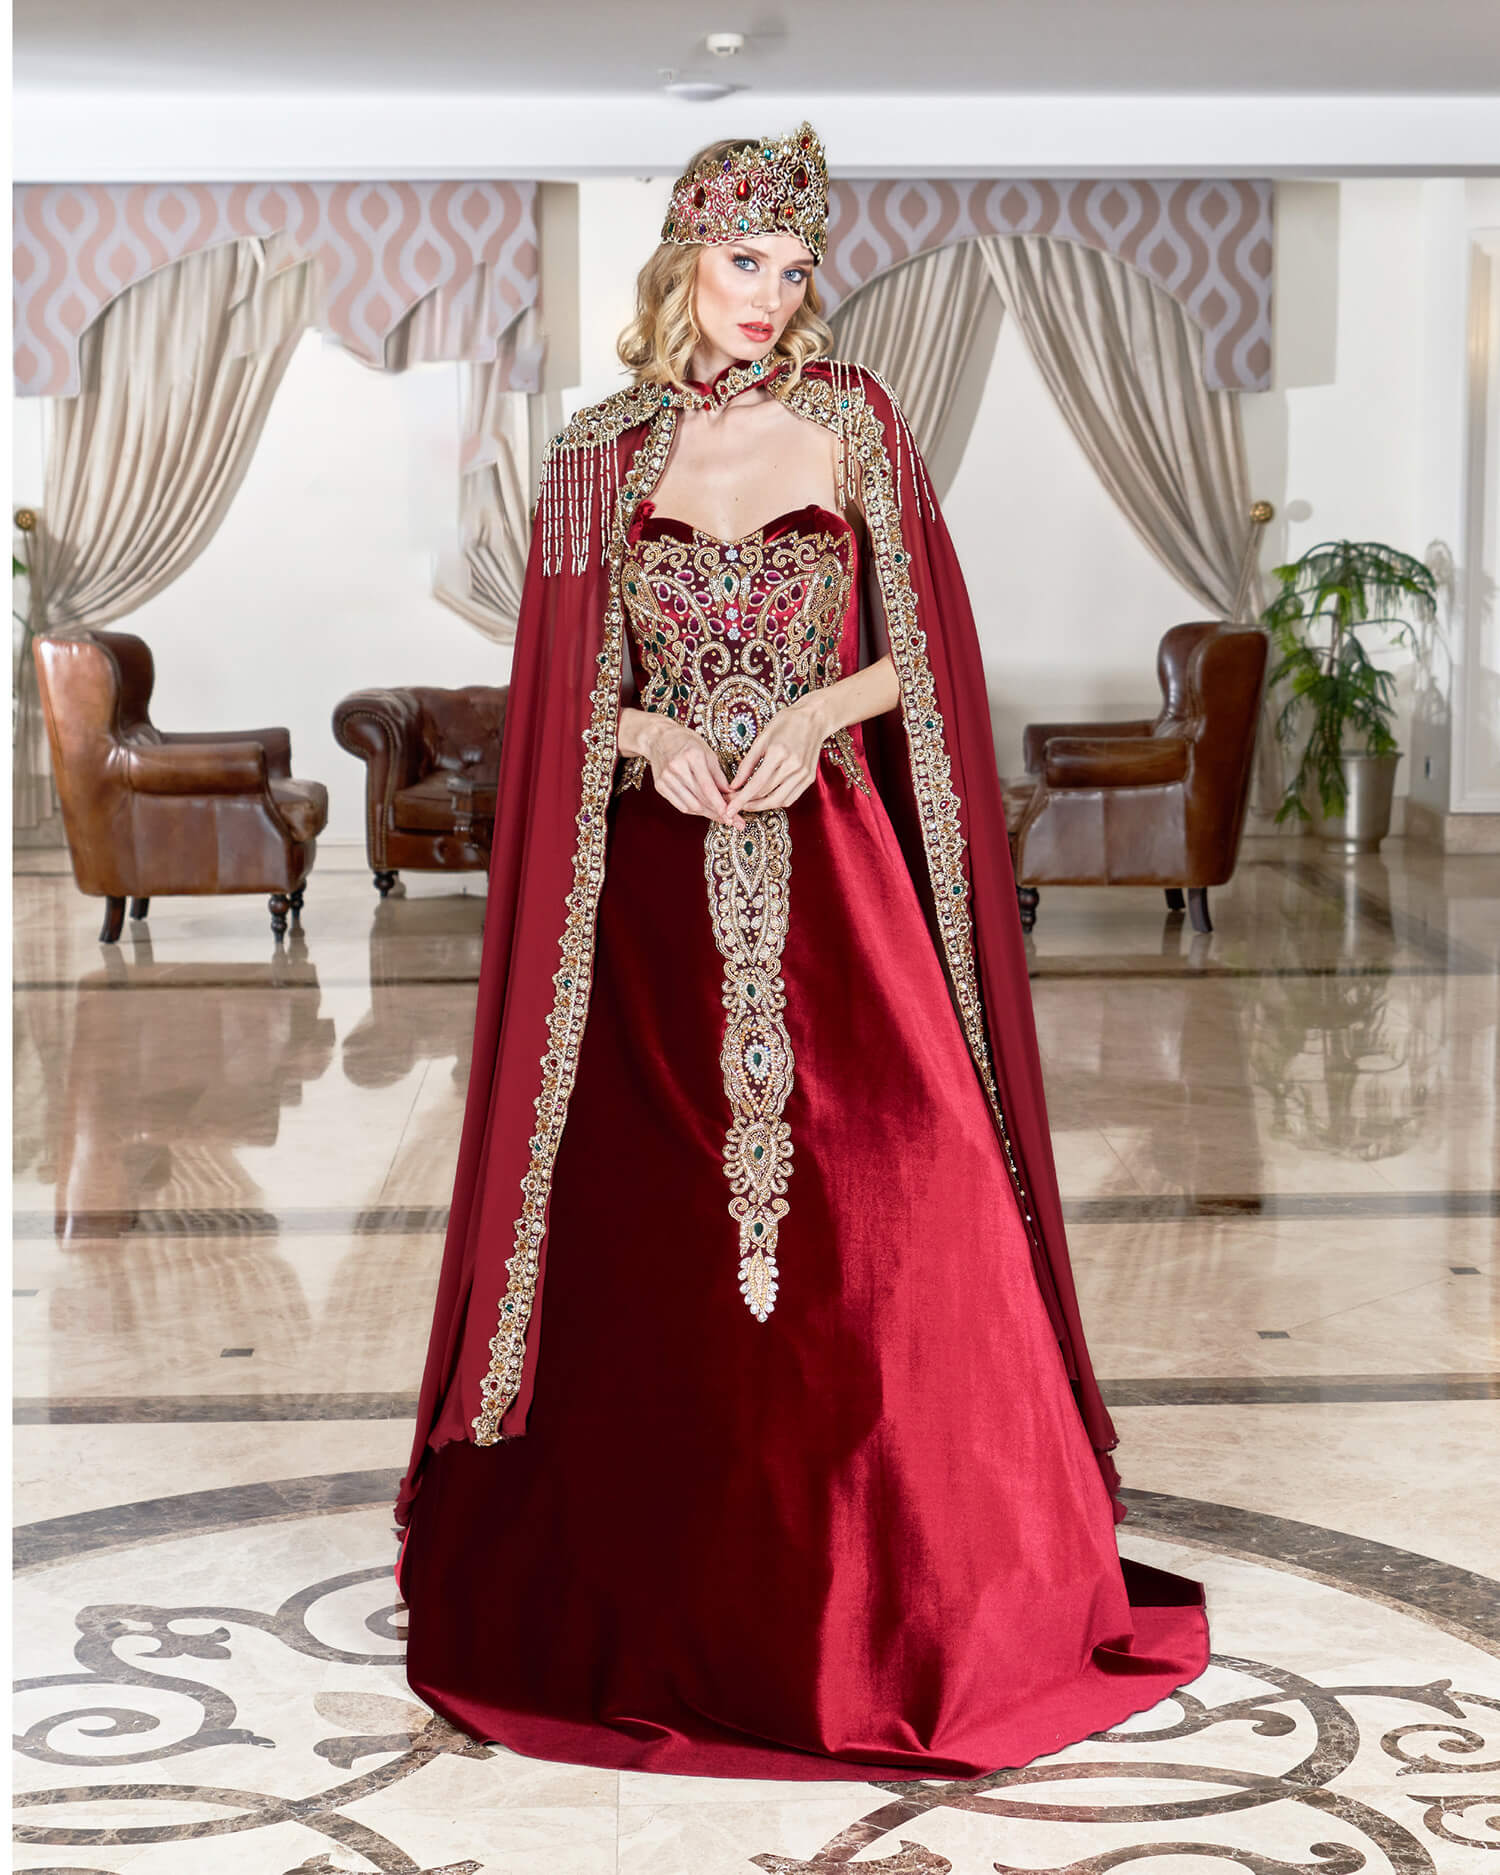 Claret Red Henna Night Dress With Cape